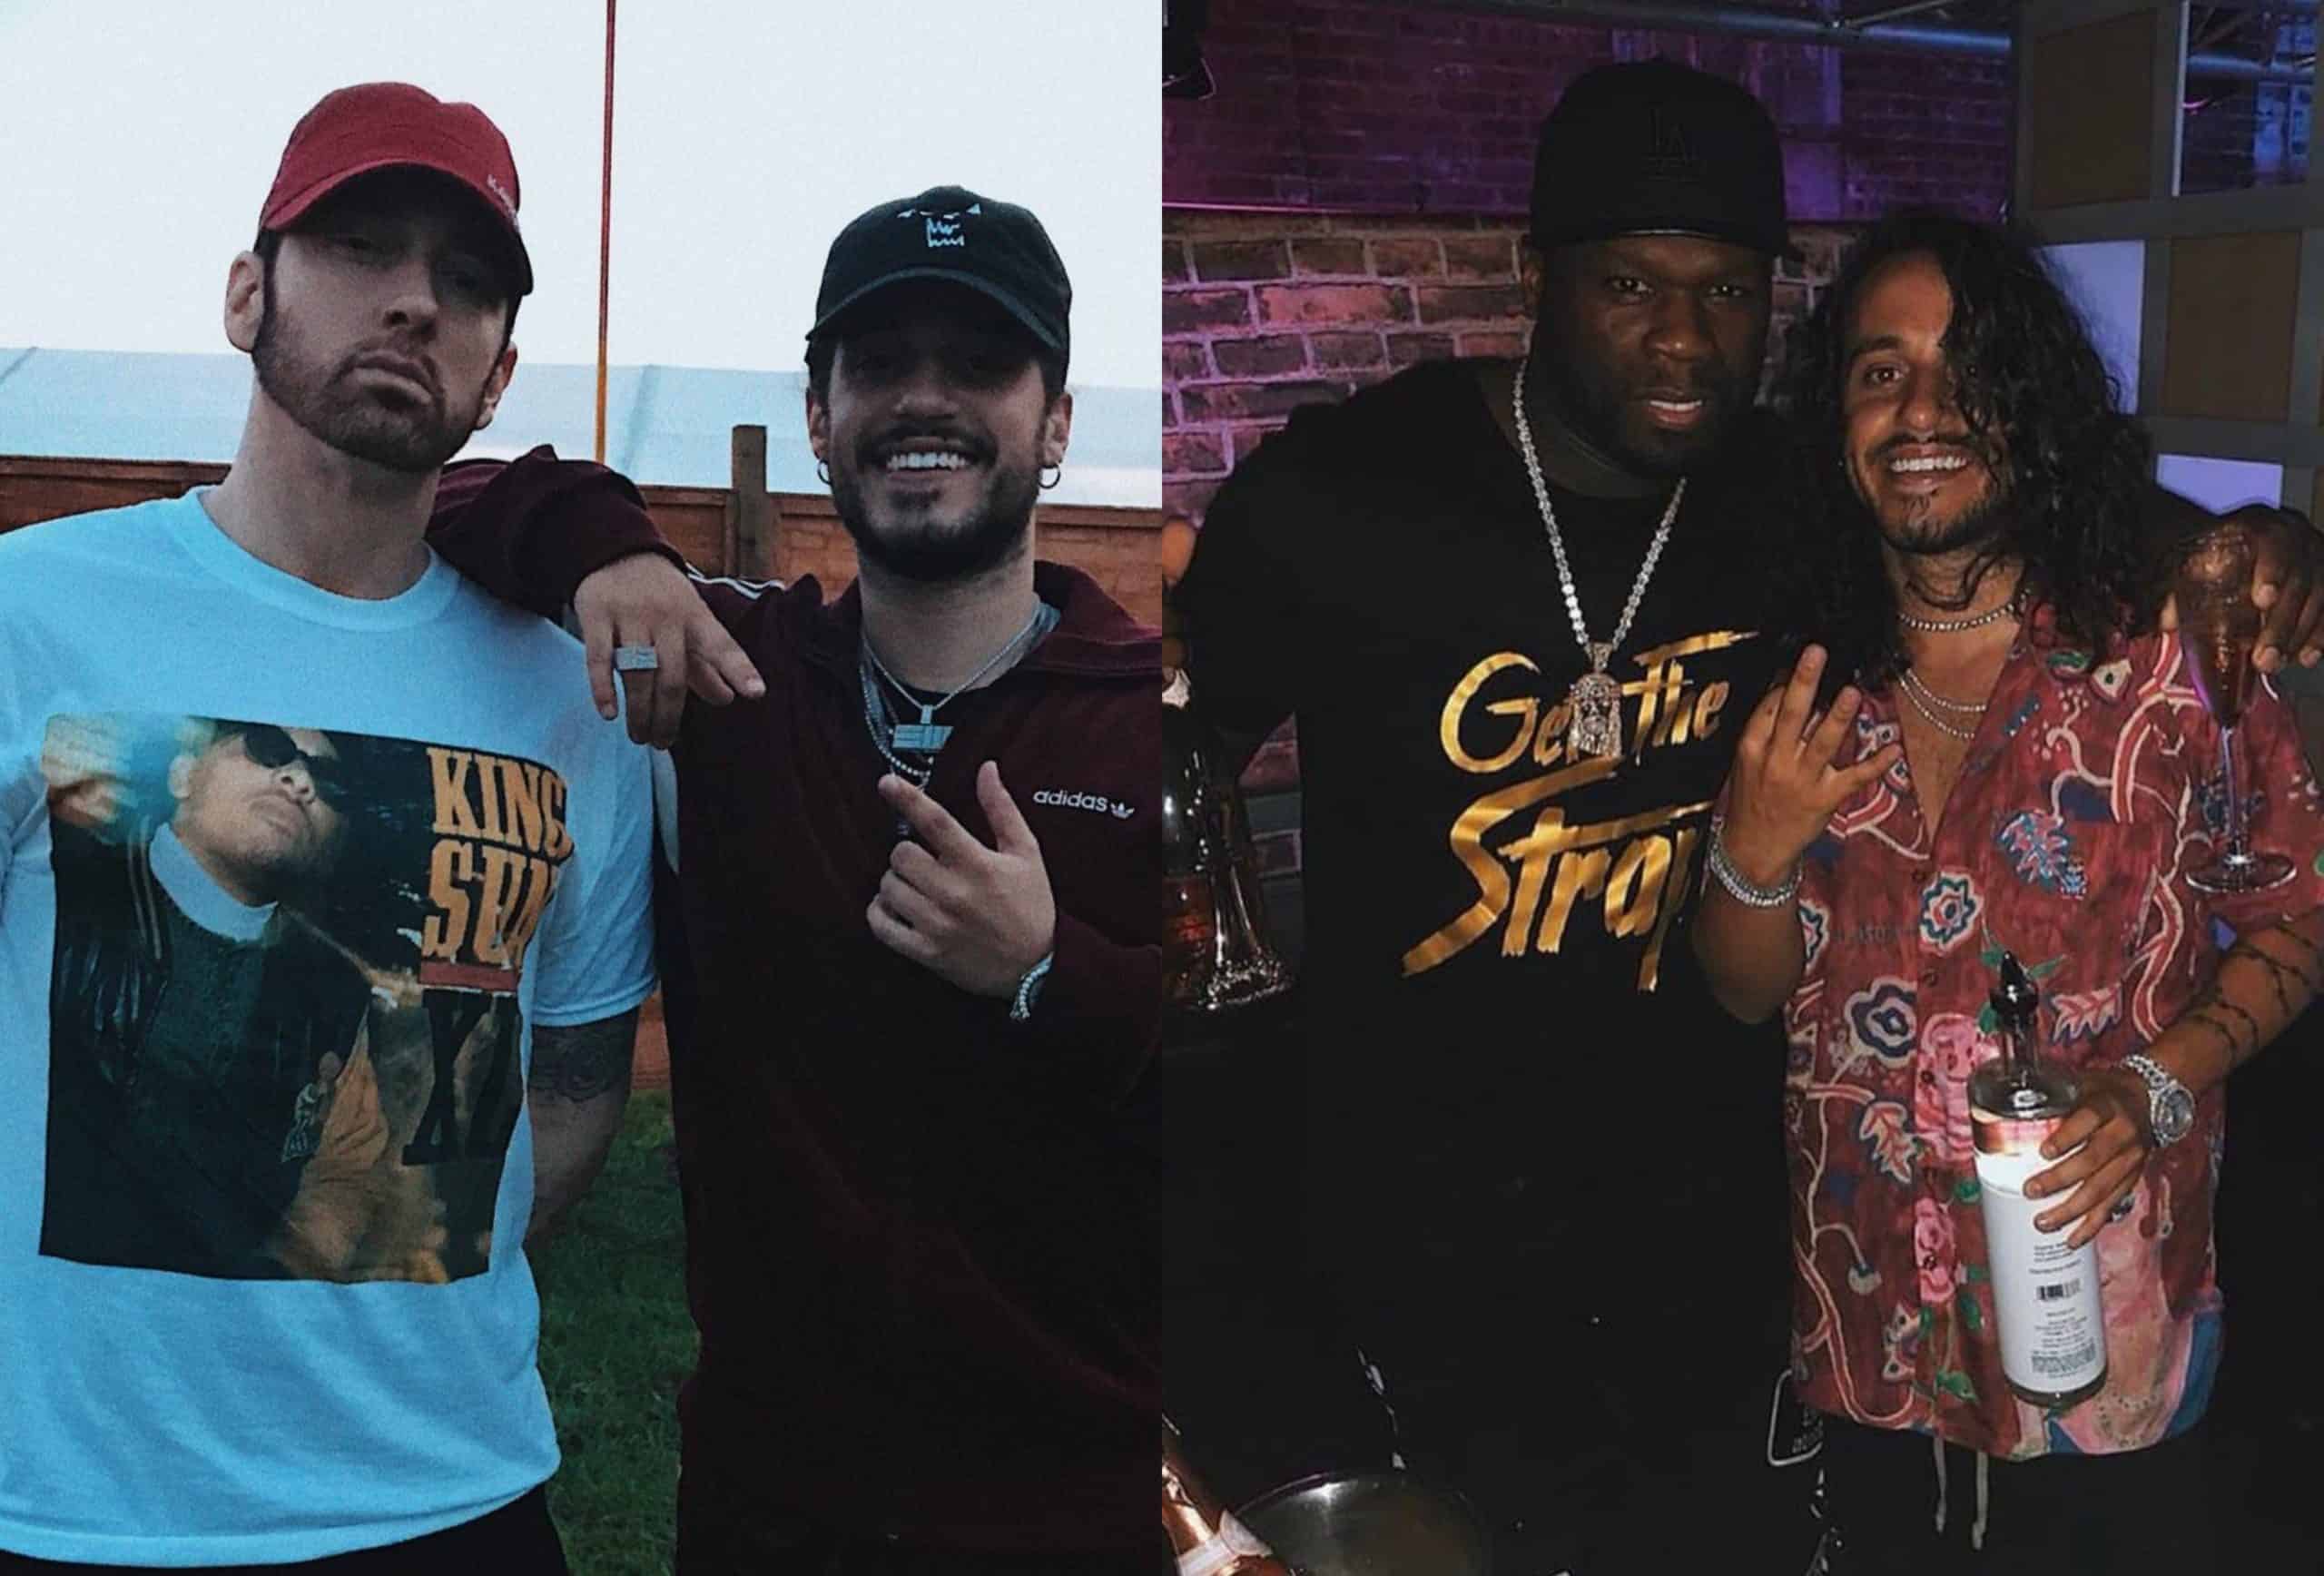 Russ Reveals 50 Cent & Eminem Influenced Him To Get Interested In Rap